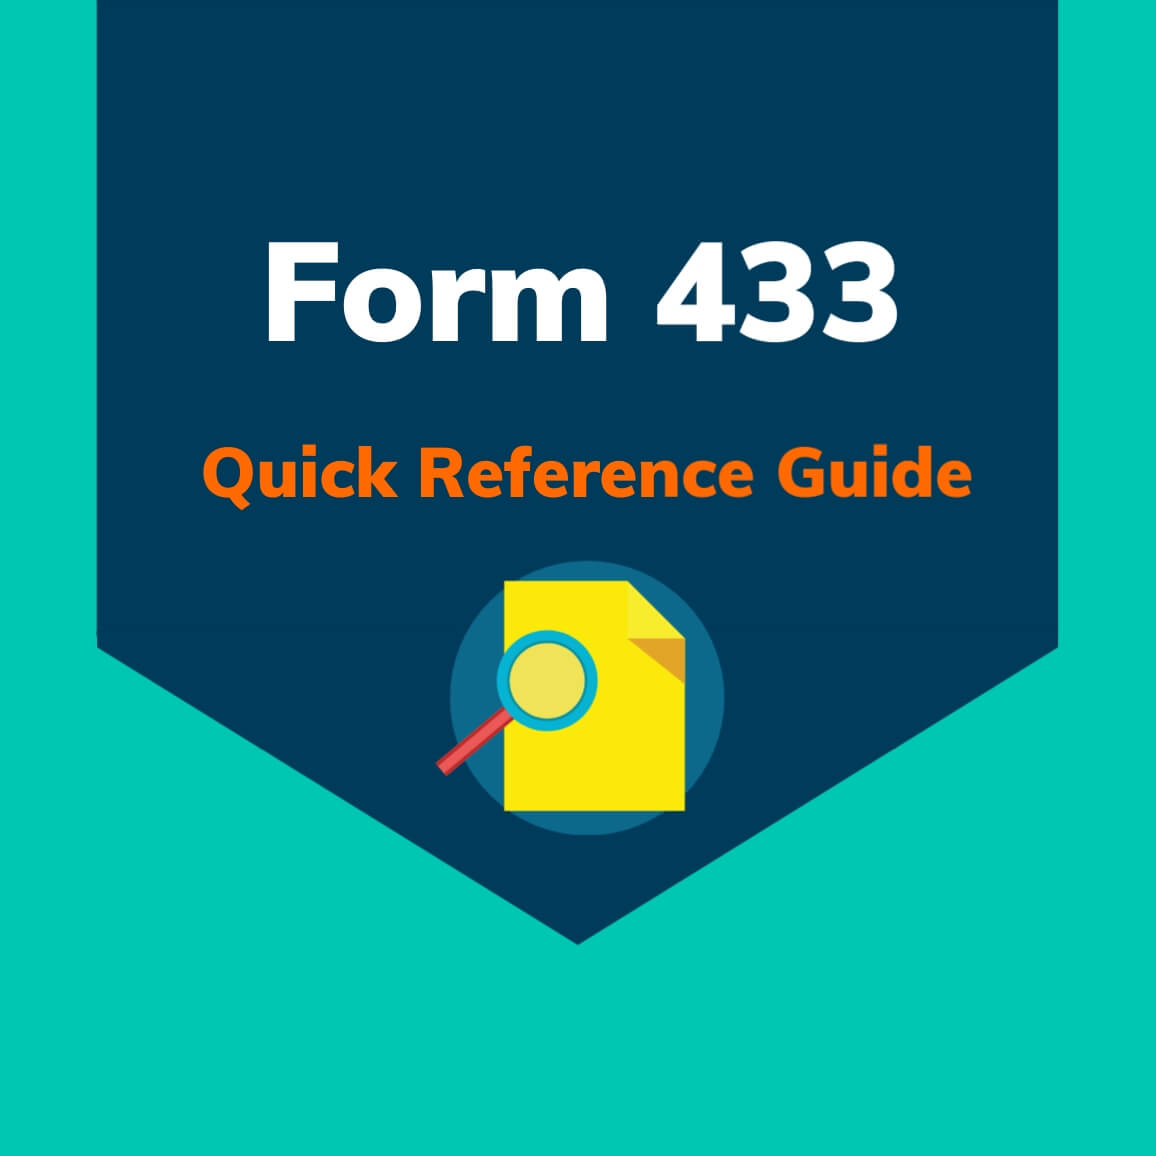 Form 433 Quick Reference Quide pdf download